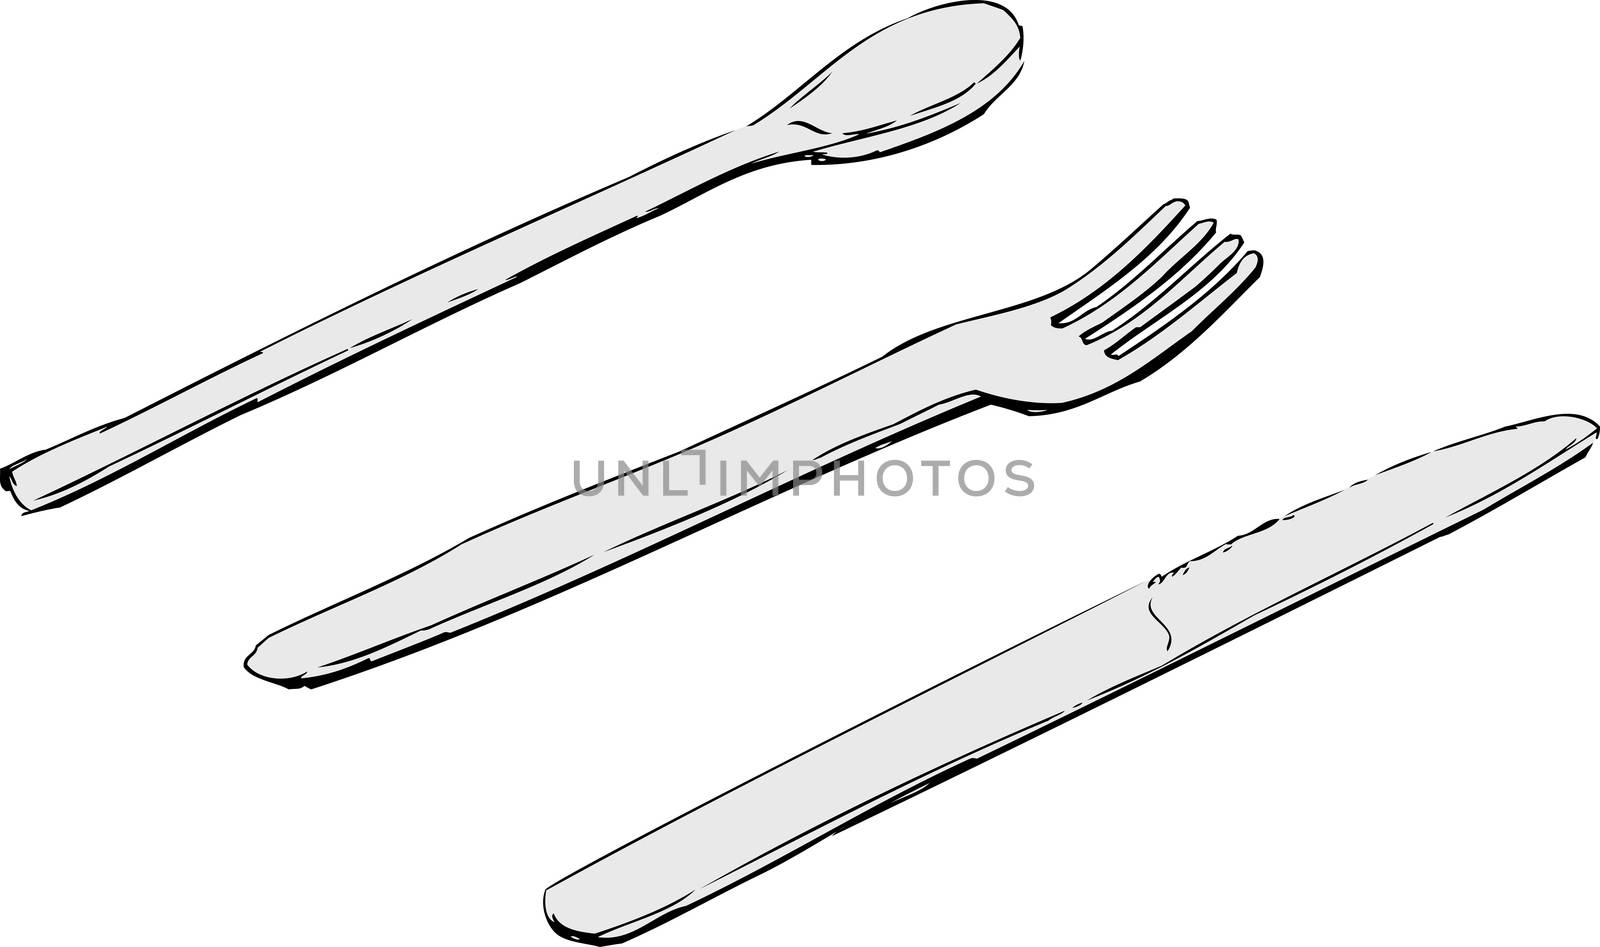 Knife, fork and spoon sketches by TheBlackRhino